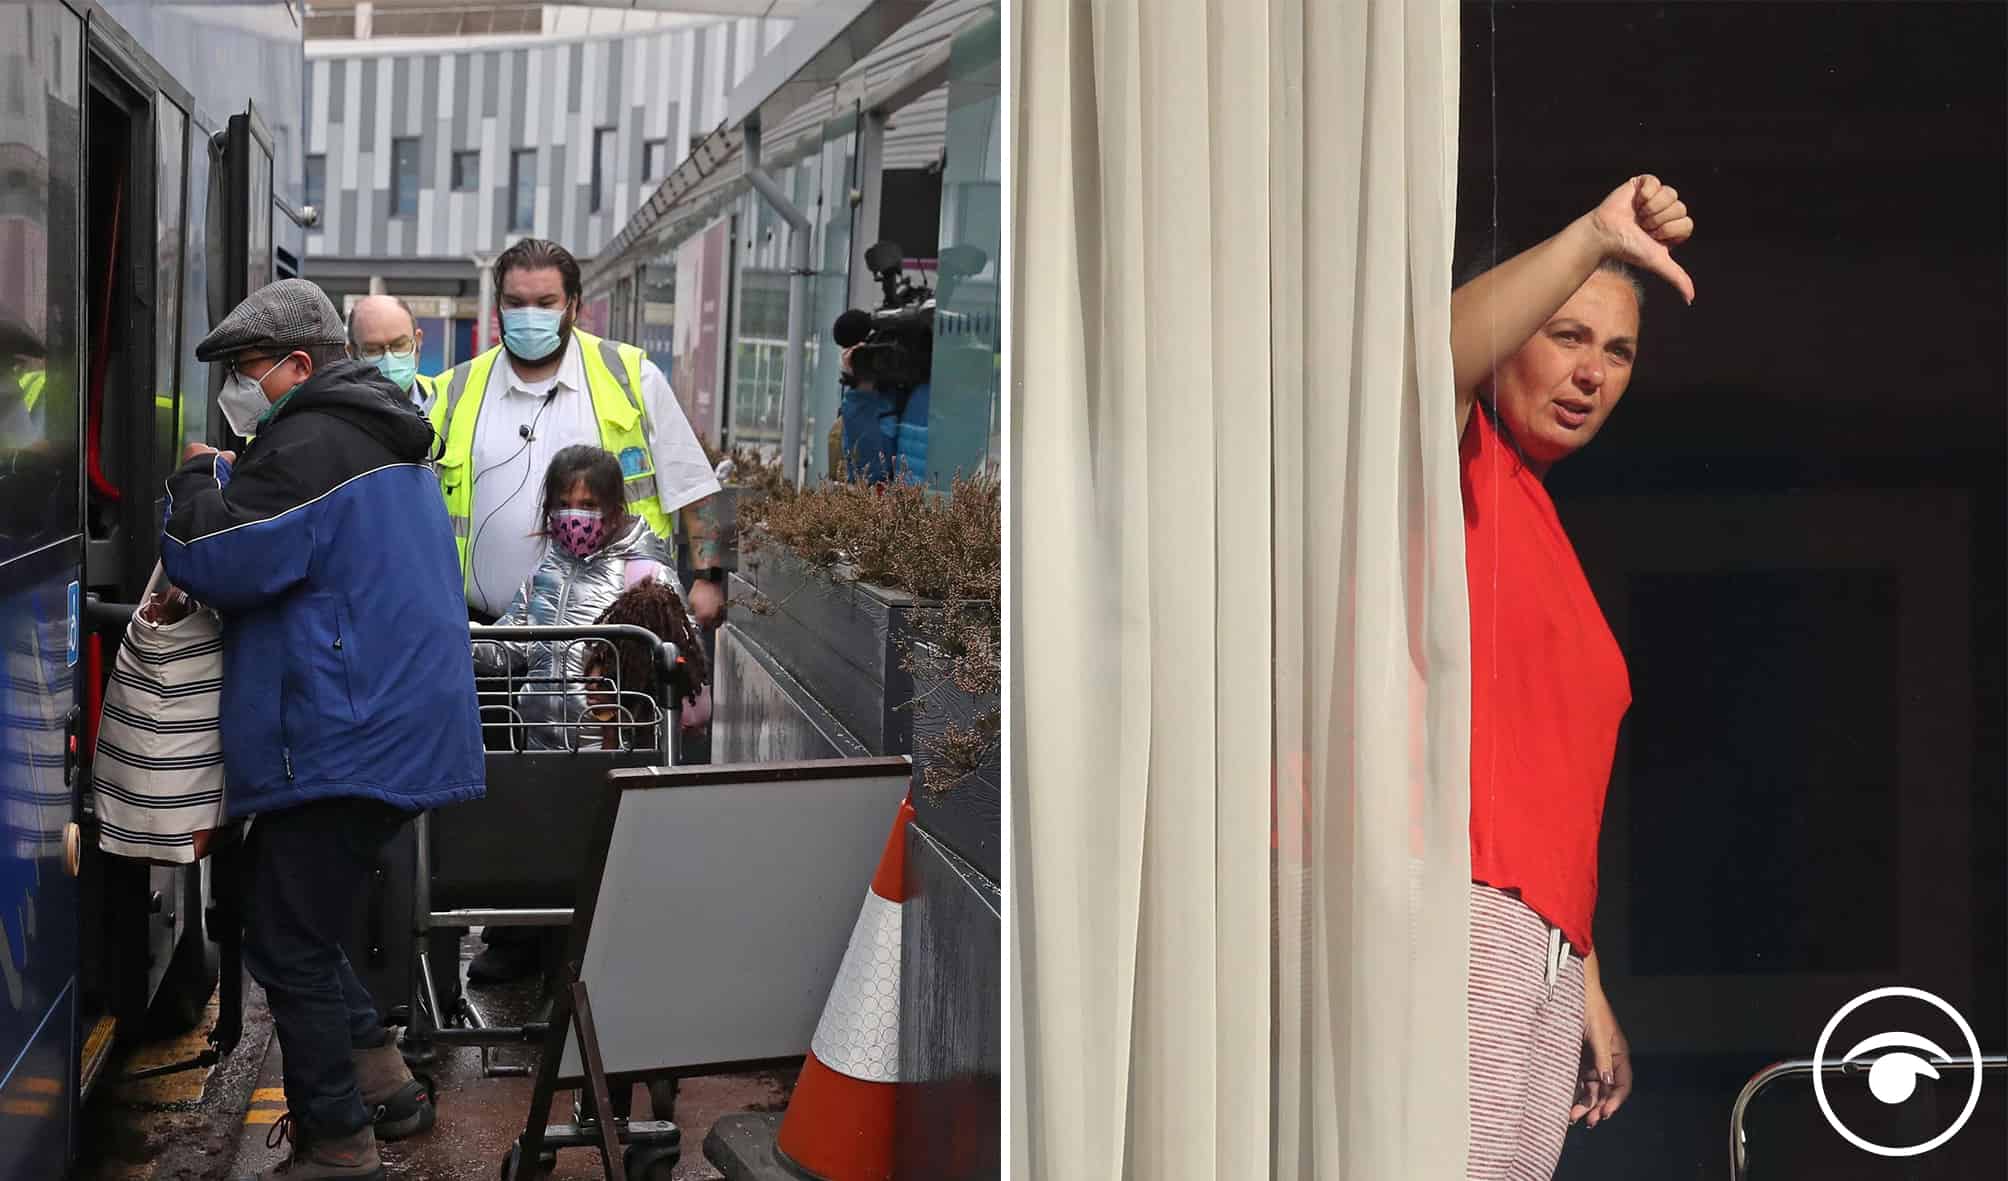 Quarantine rules ‘don’t make sense’ after travellers avoided restrictions as £1,200 extra bill if guests test positive